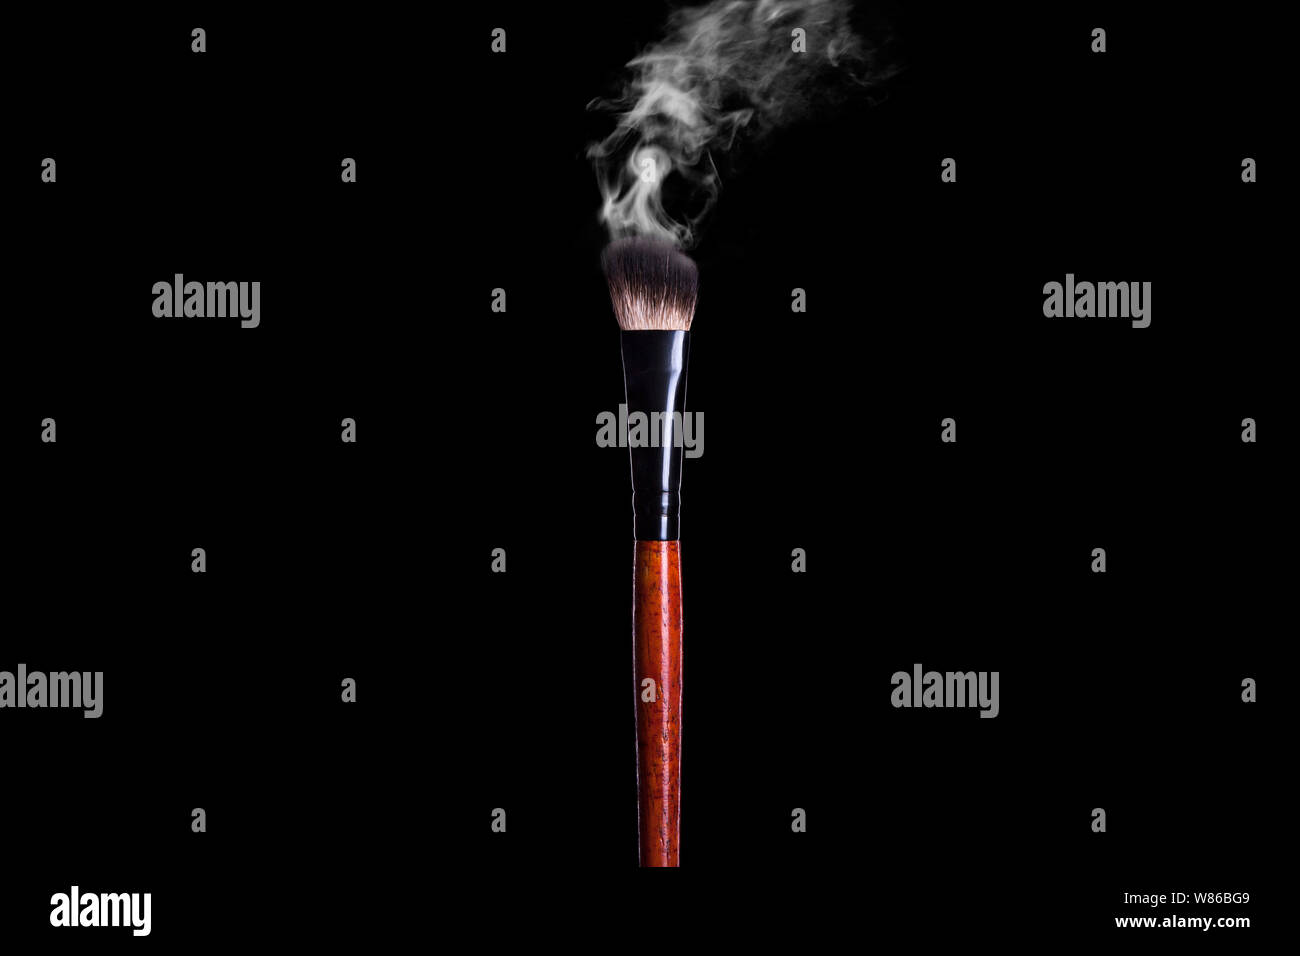 Steaming wooden brush for makeup and cosmetics on a black background. Stock Photo